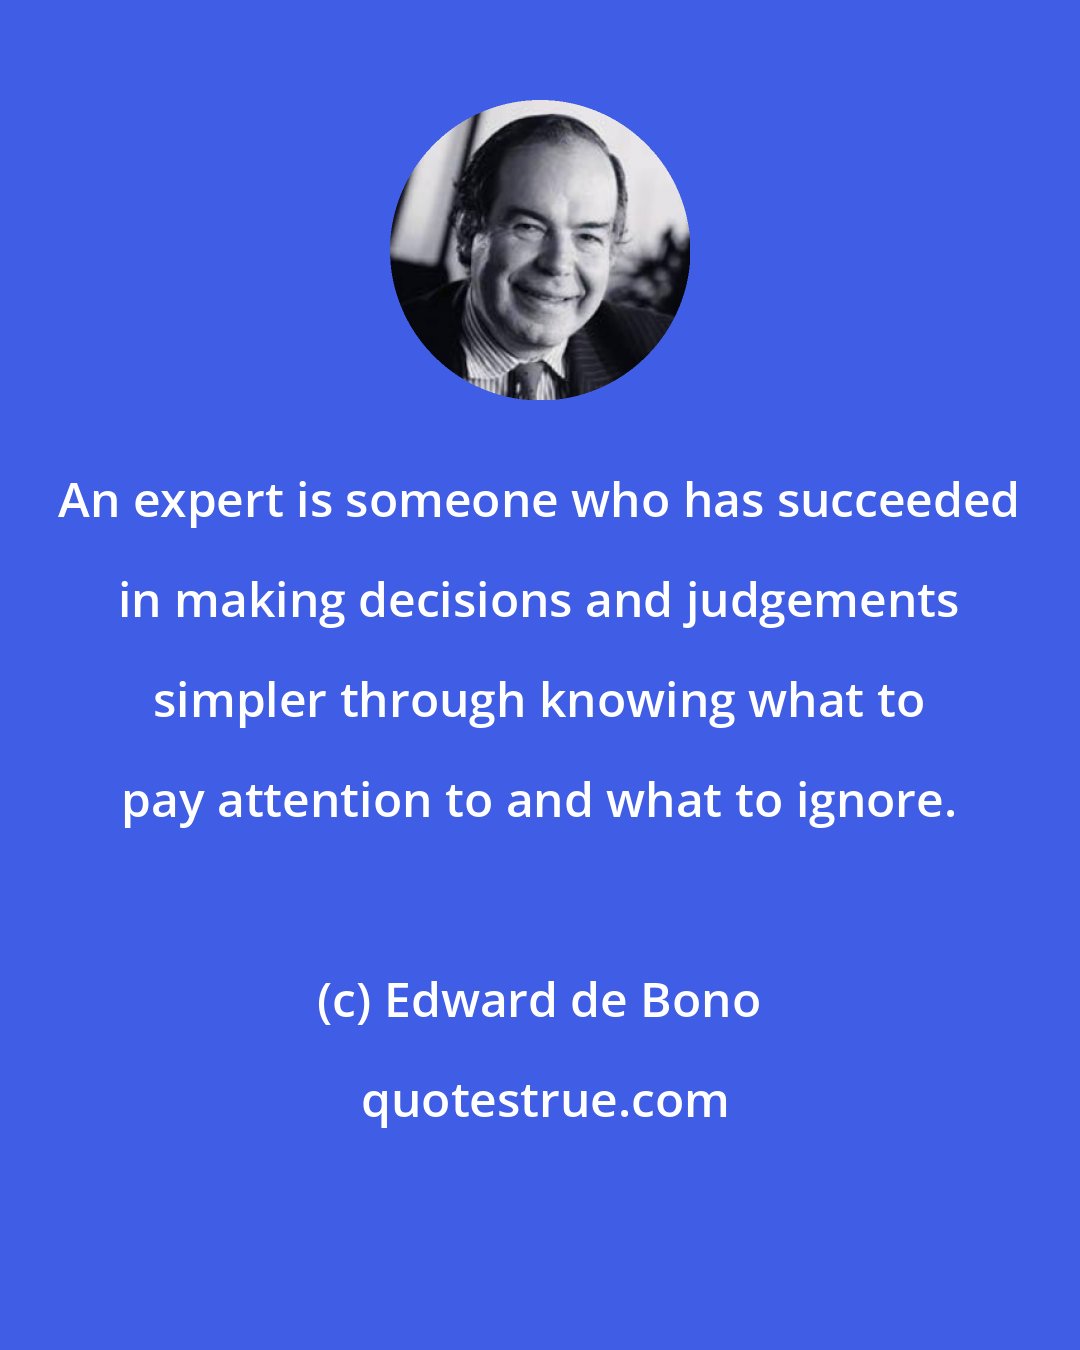 Edward de Bono: An expert is someone who has succeeded in making decisions and judgements simpler through knowing what to pay attention to and what to ignore.